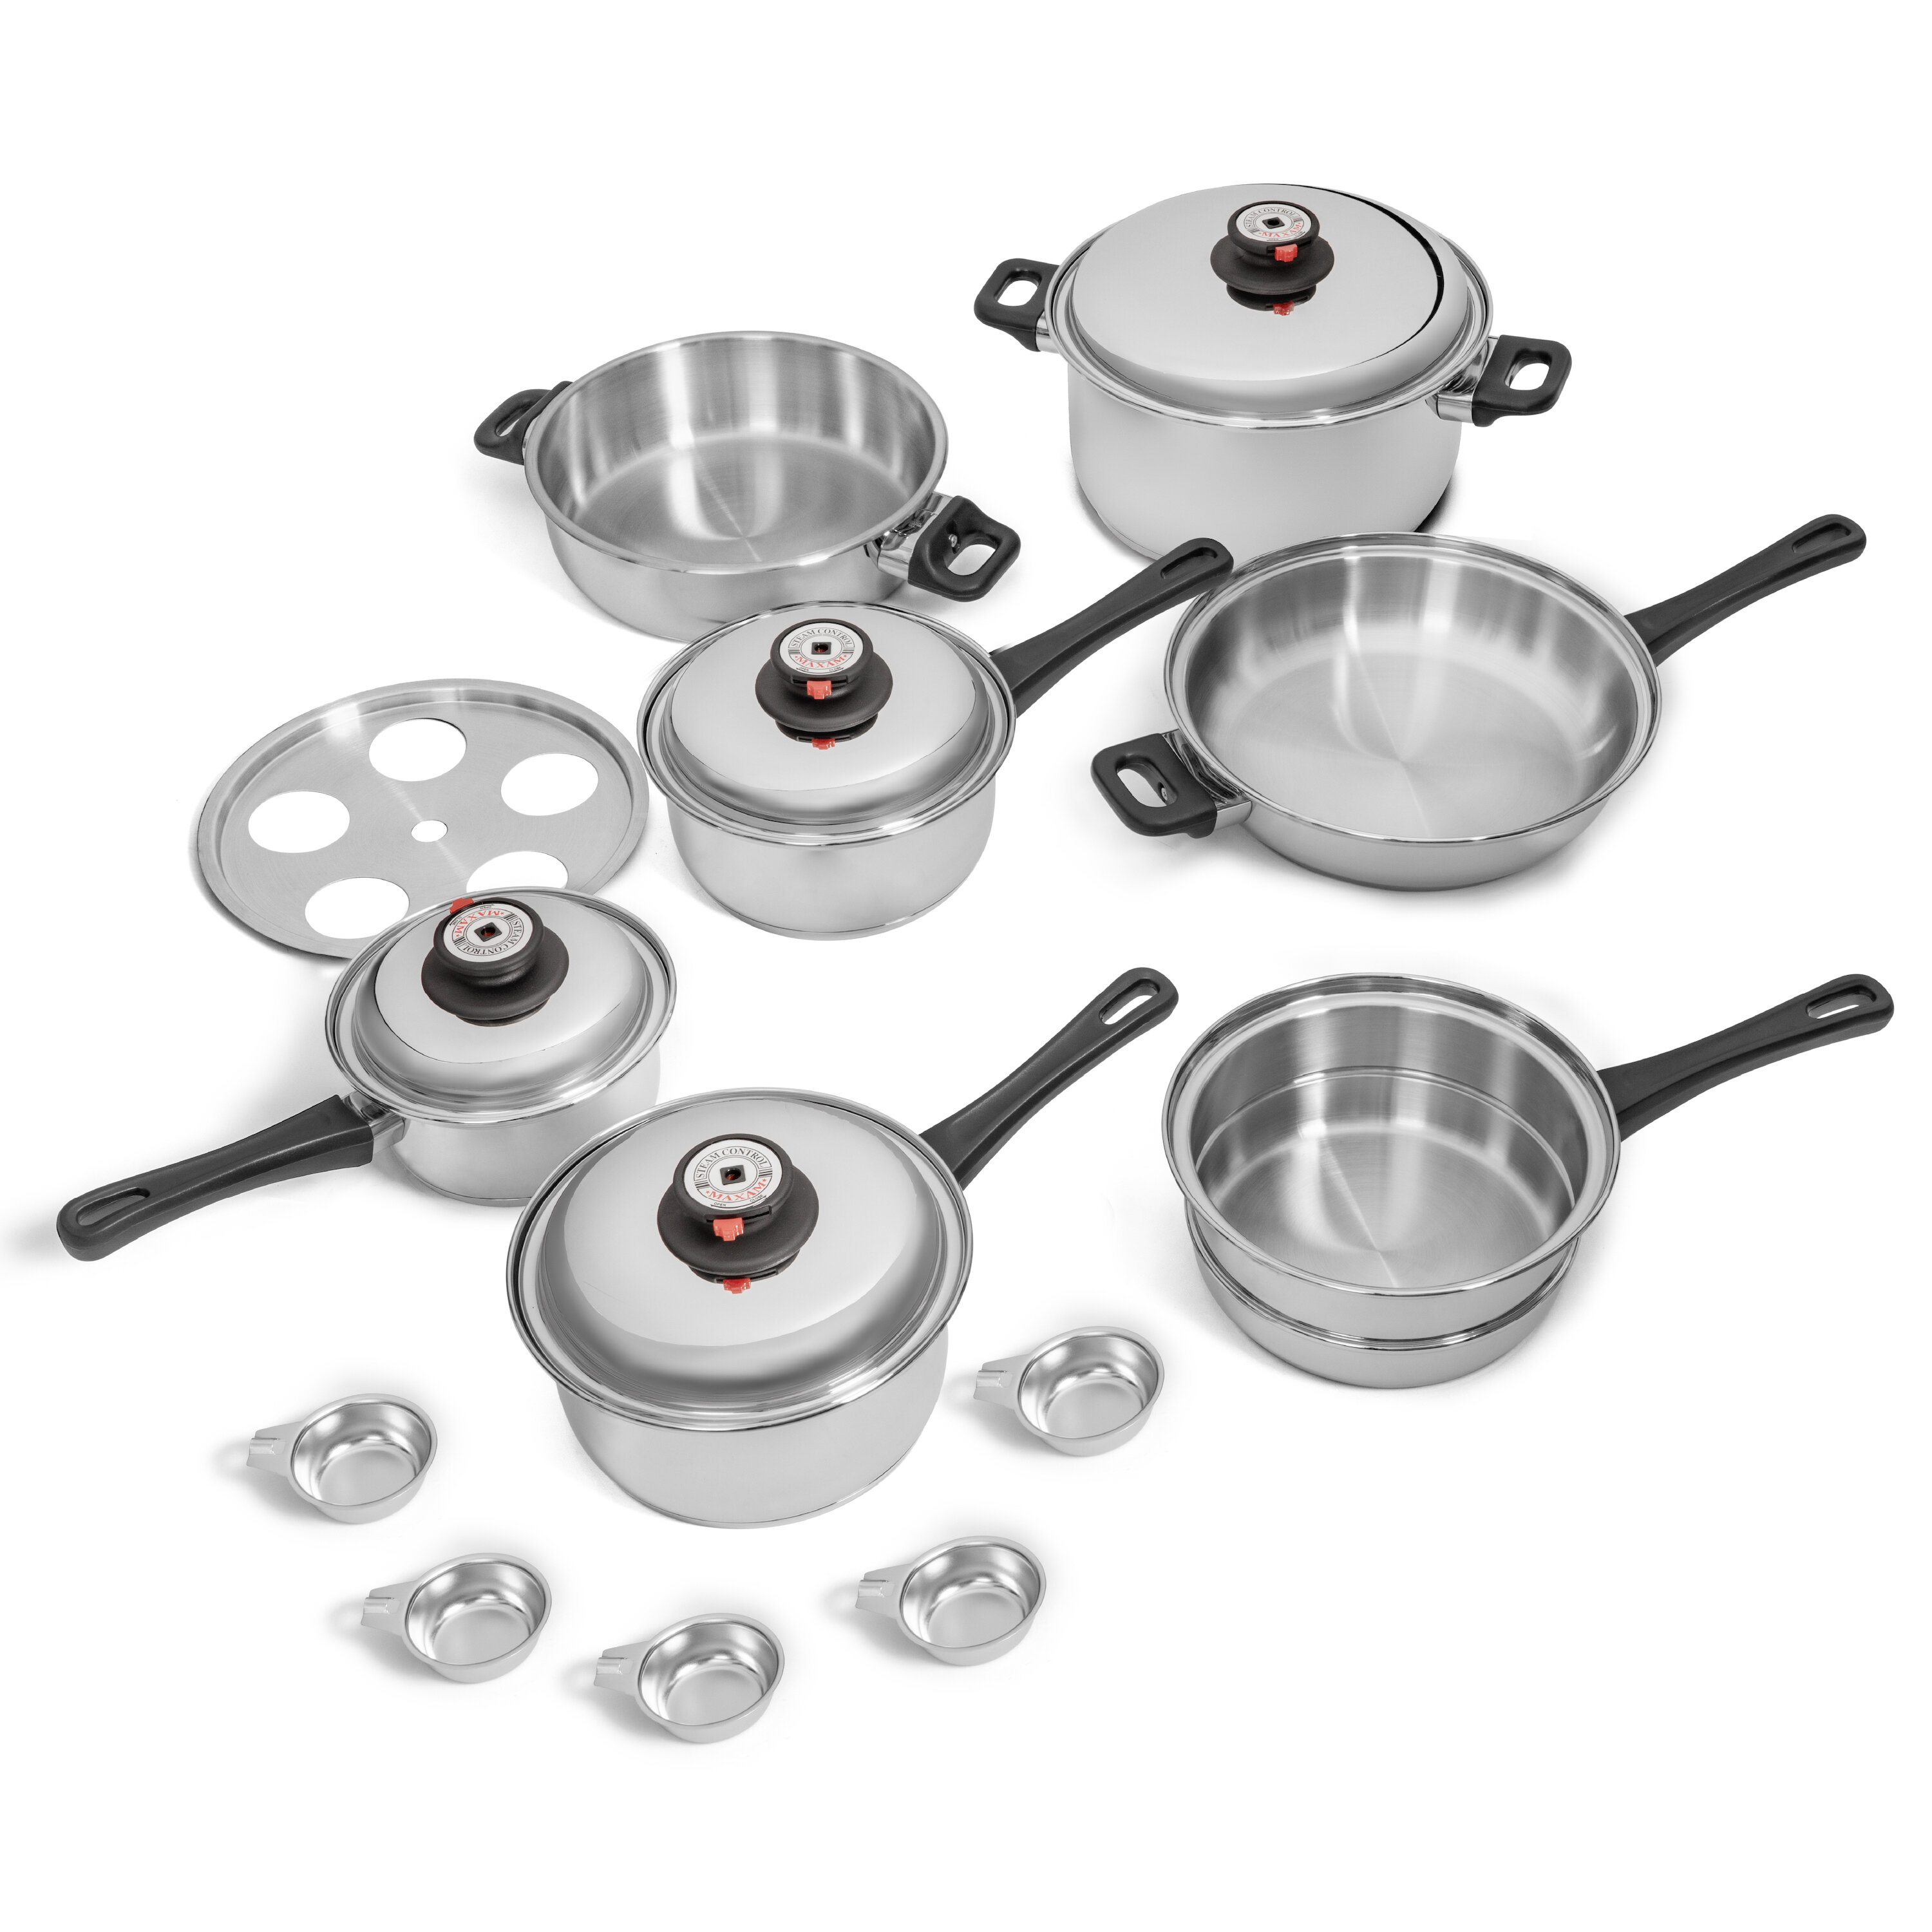 Farberware Pots and Pans Set 17-piece Nonstick Stainless Steel